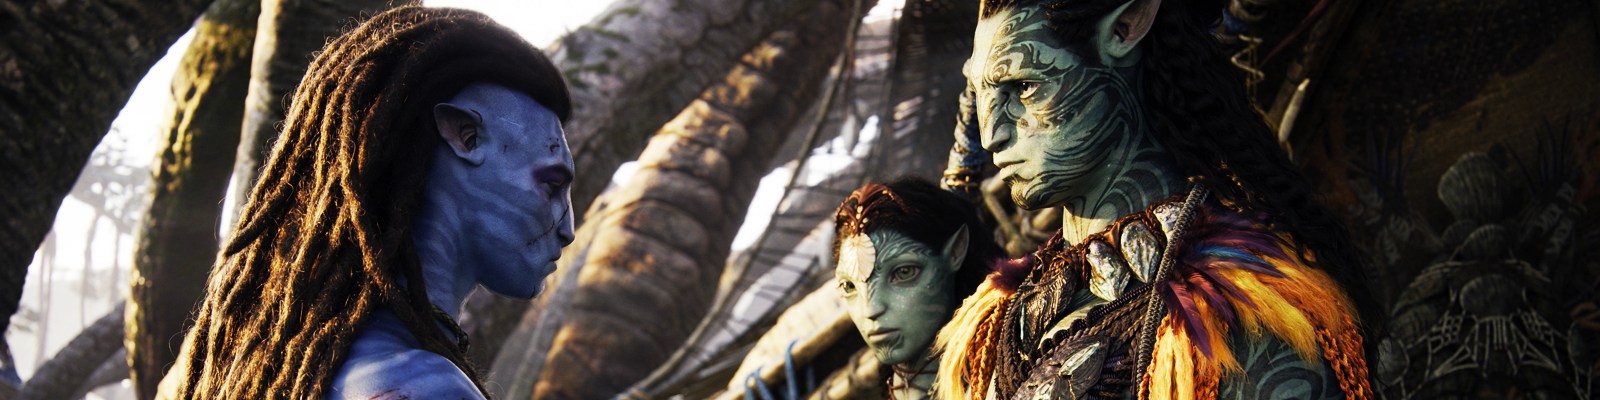 Yes, ‘Avatar: The Way Of Water’ Producer Jon Landau Thinks ‘Avatar’ Has A Cultural Impact